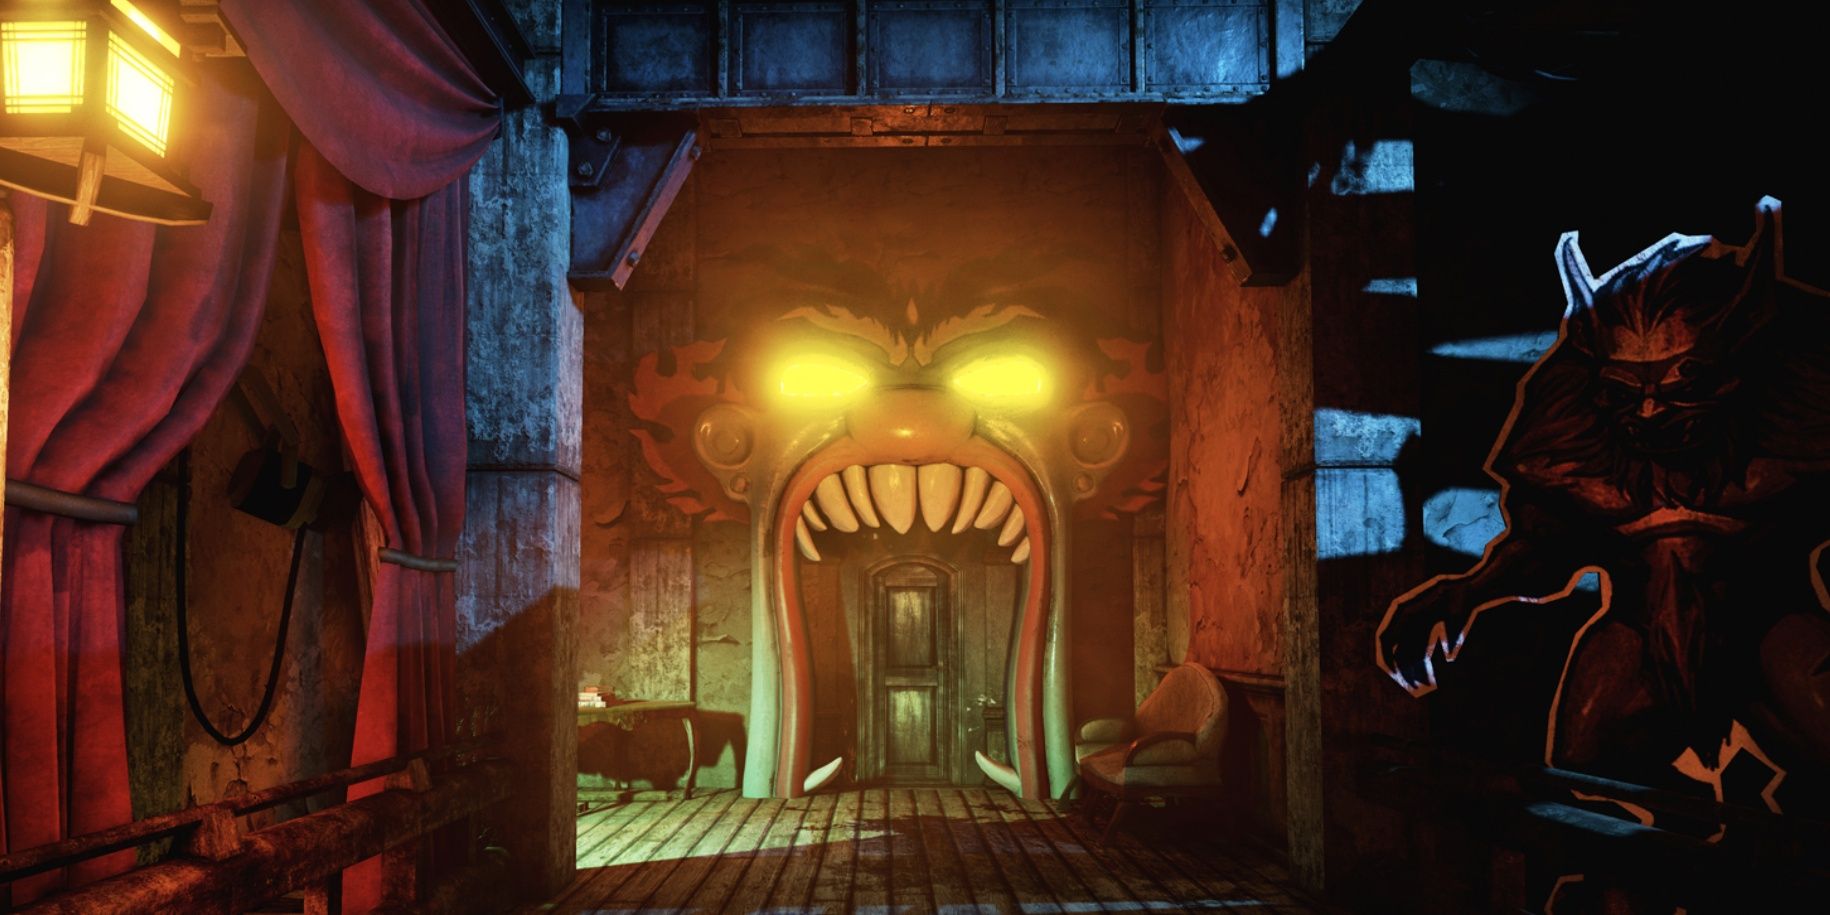 The Park - A Haunted House Attraction With A Door Shaped Like The Face Of A Monstrous Clown